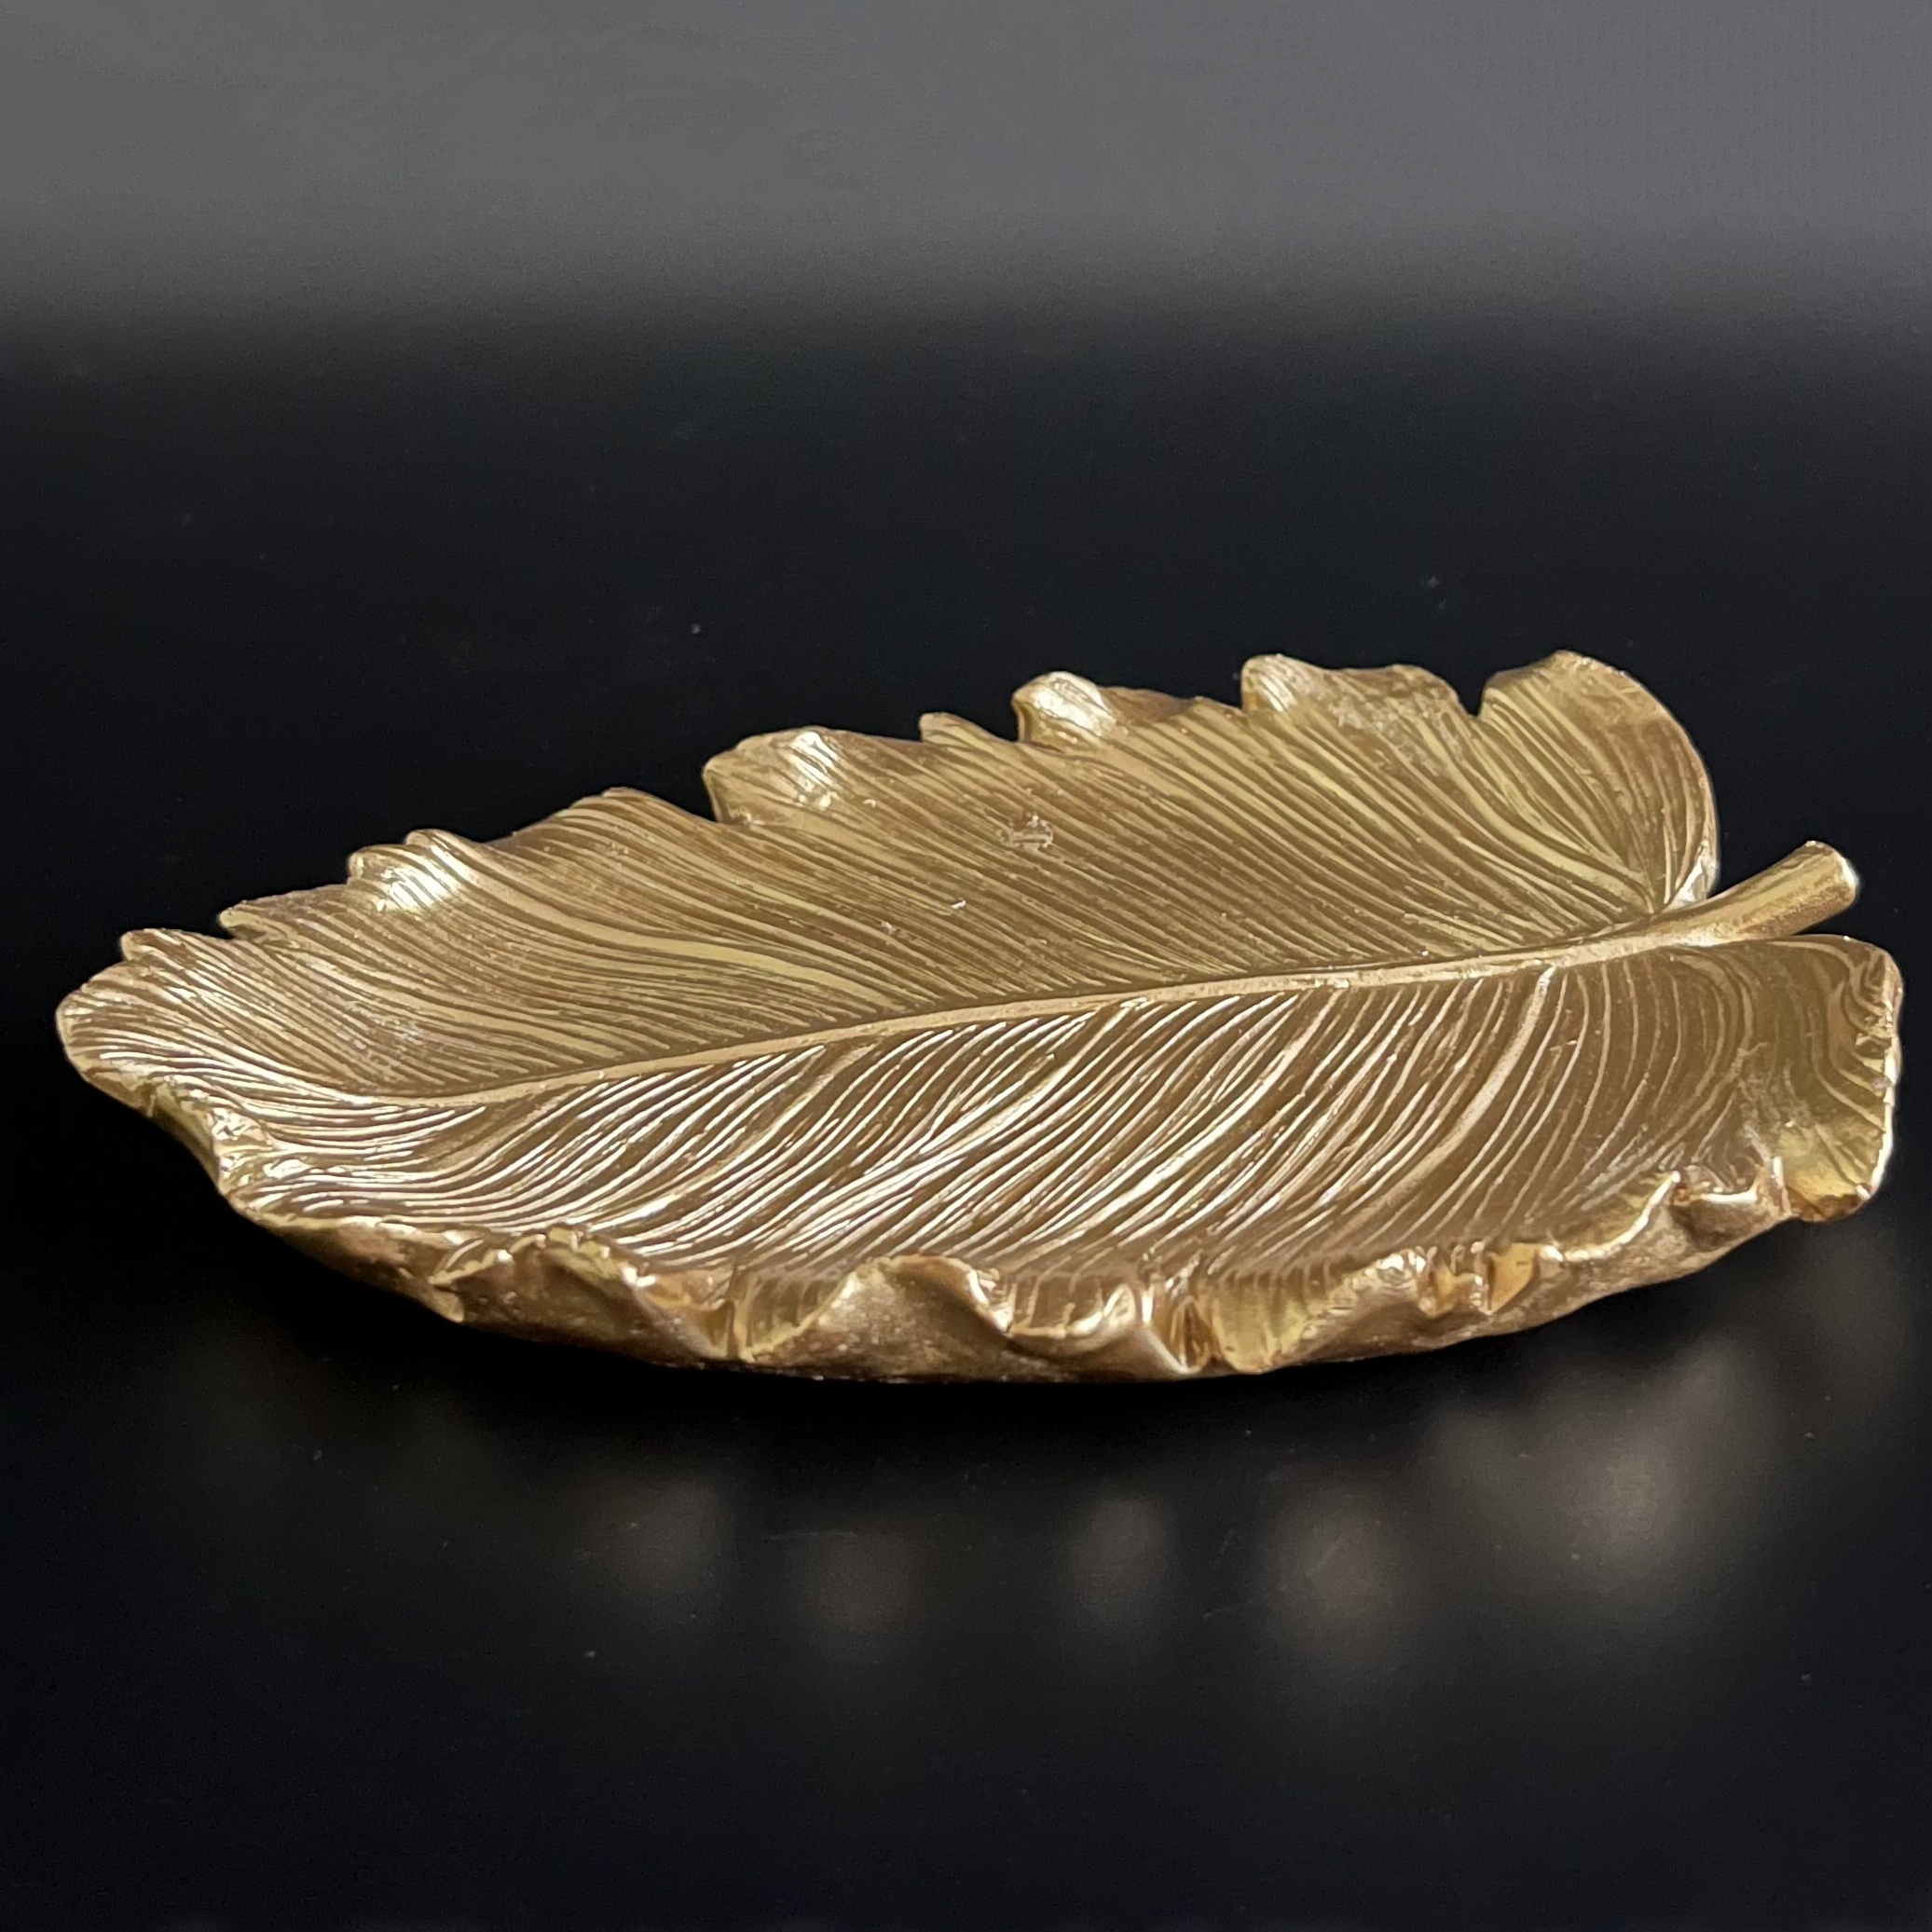 

1pc European Style Golden Leaf Resin Tray, Home Decor Accent, Decorative Tray For Living Room, Study, Bedroom, For Mother's Day Party Spring Graduation School Season Decor